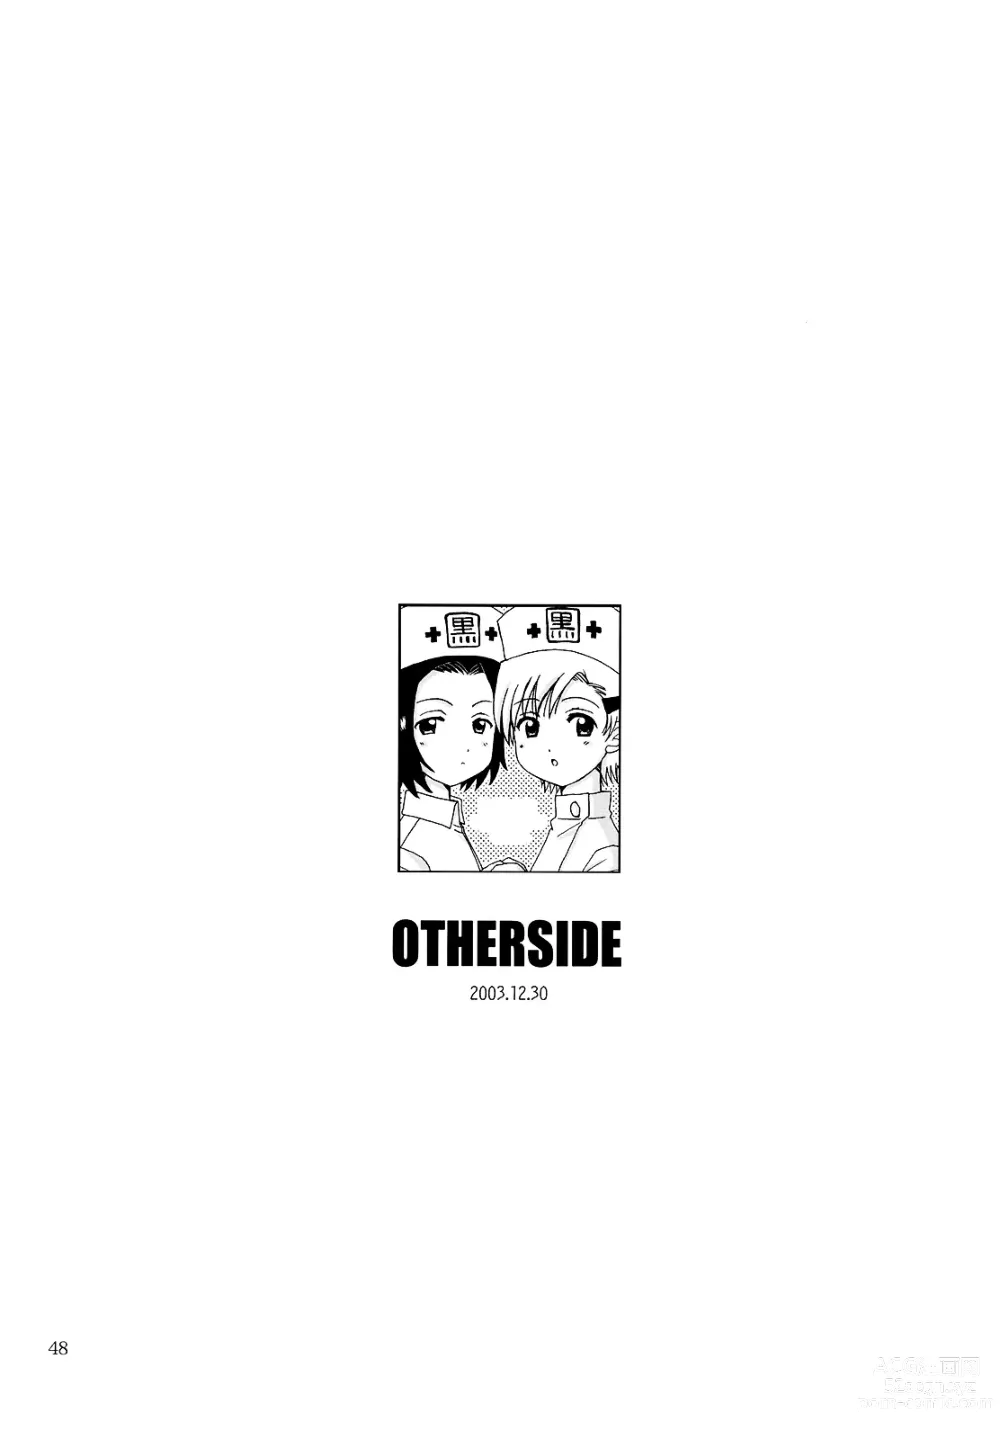 Page 48 of doujinshi OTHERSIDE Kaiteiban